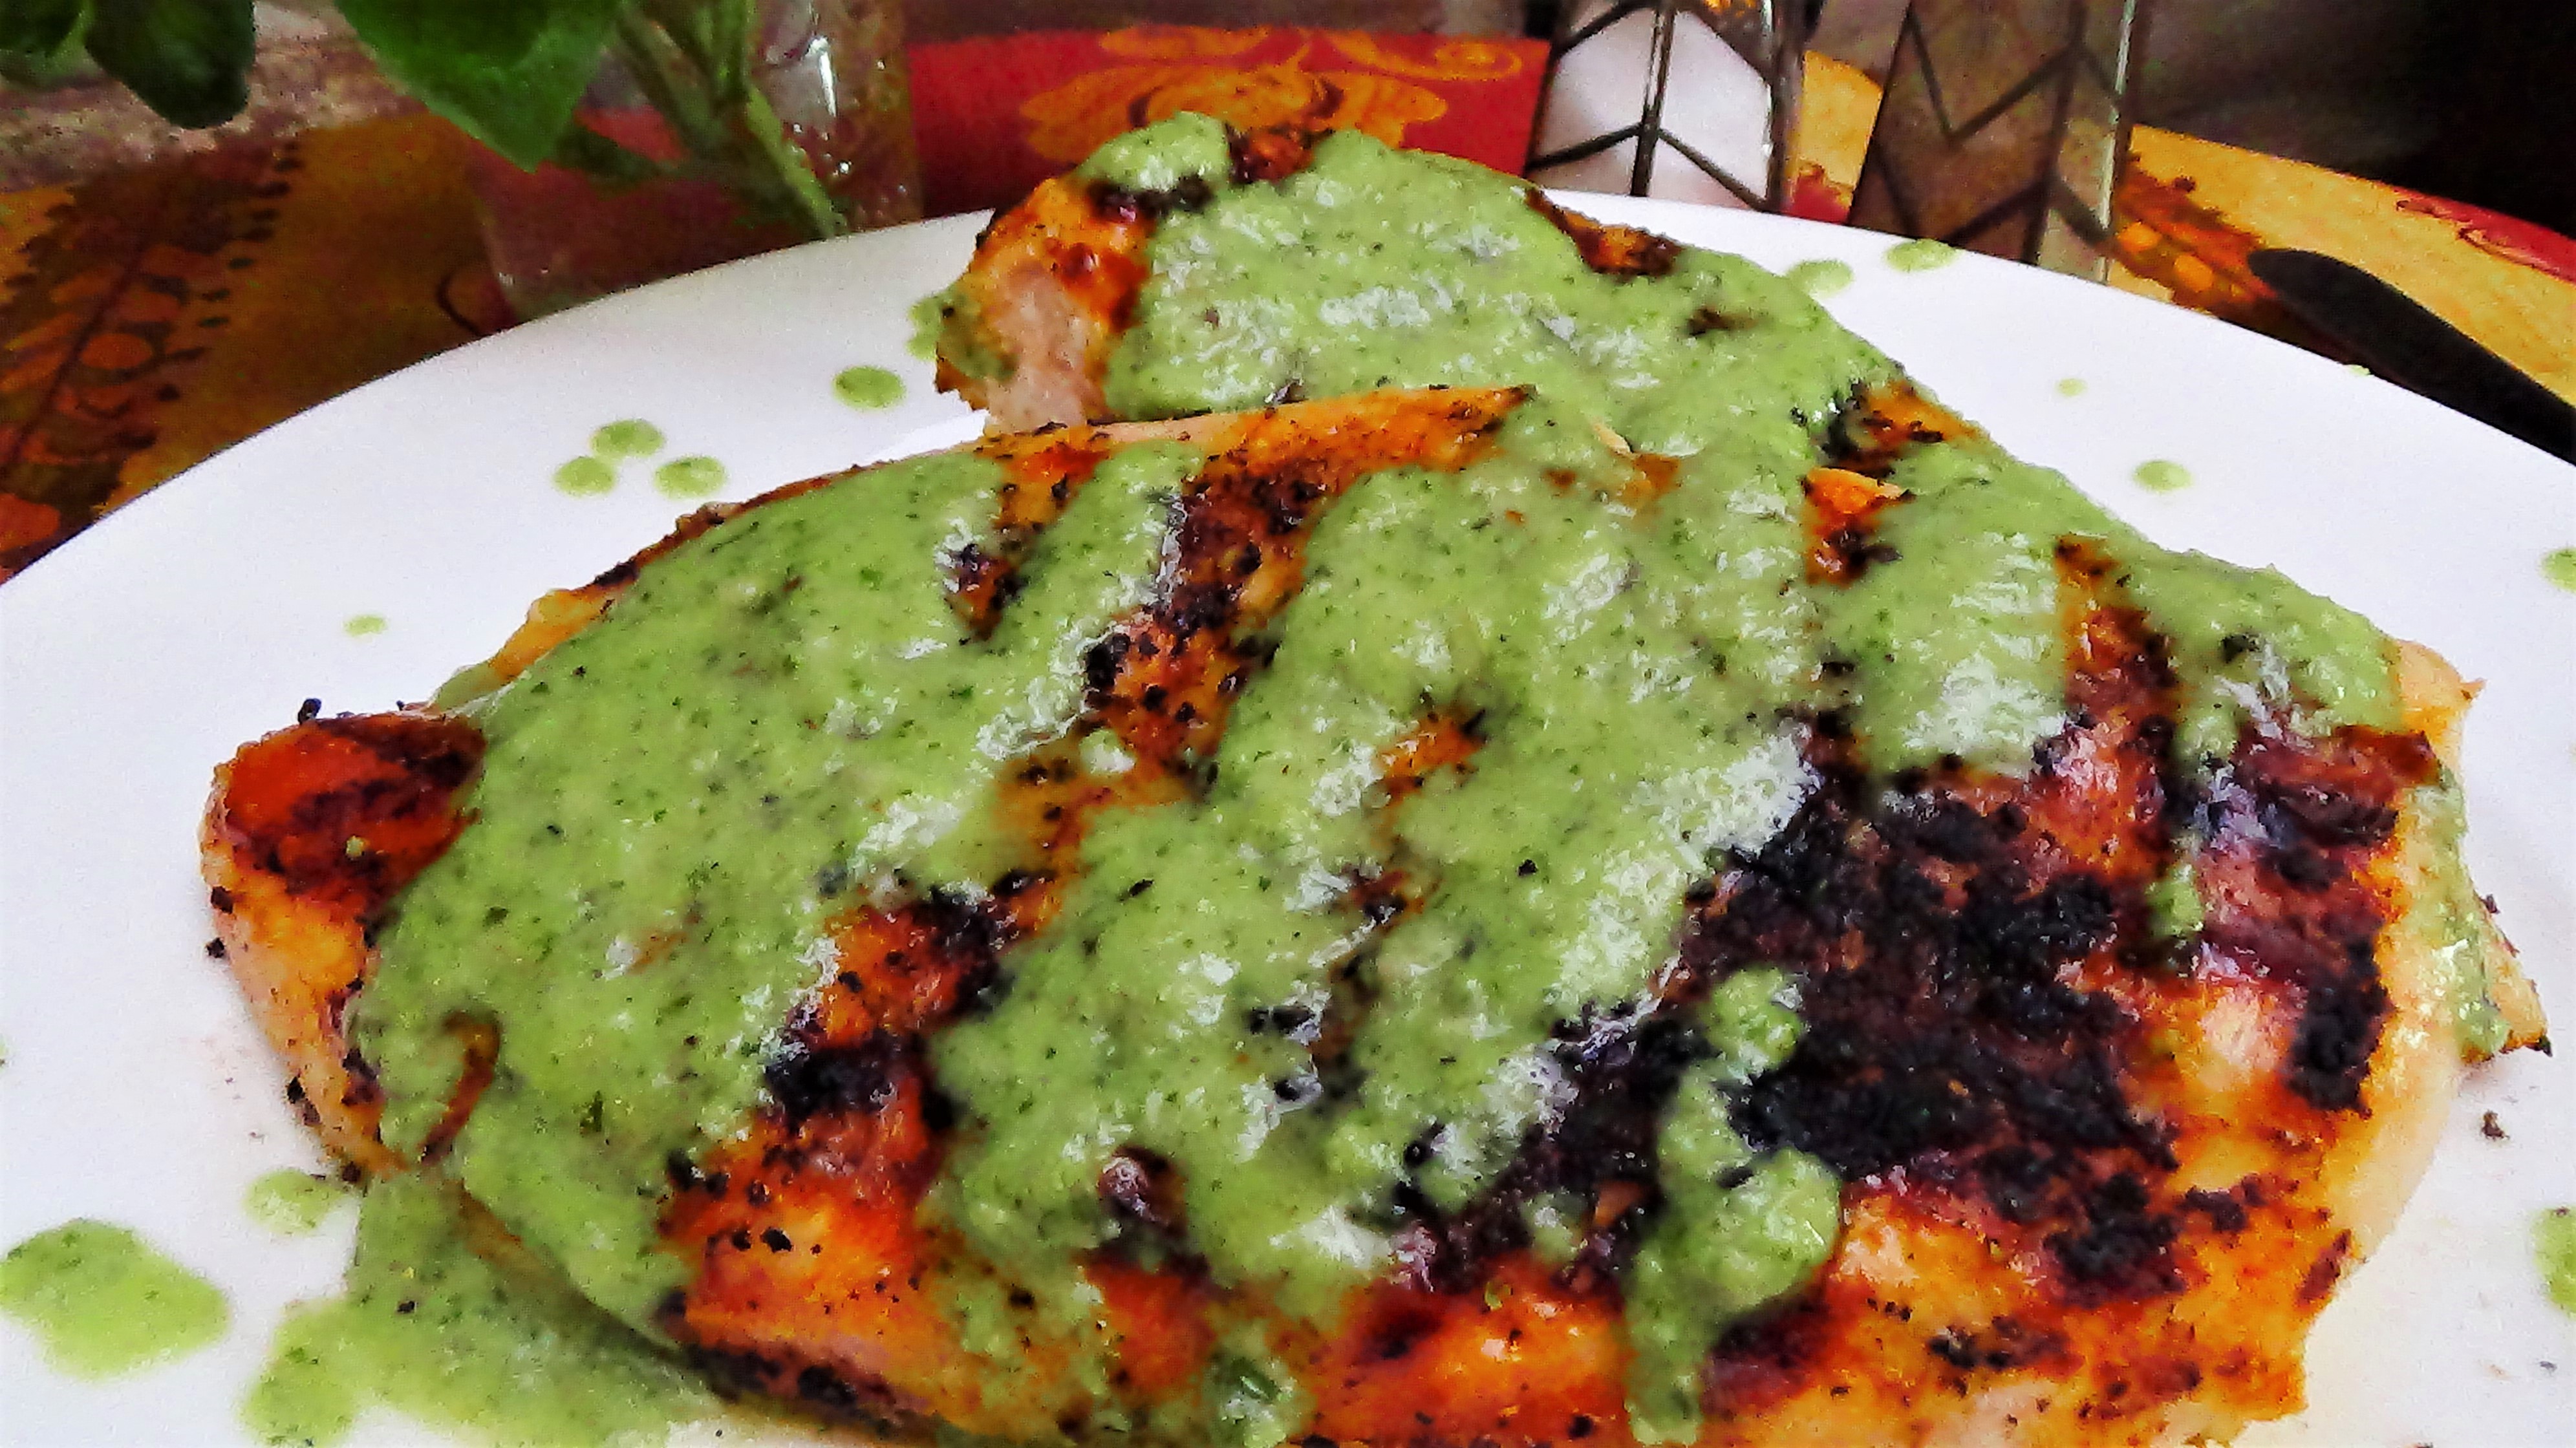 Grilled Chicken with Basil, Parmesan Sauce